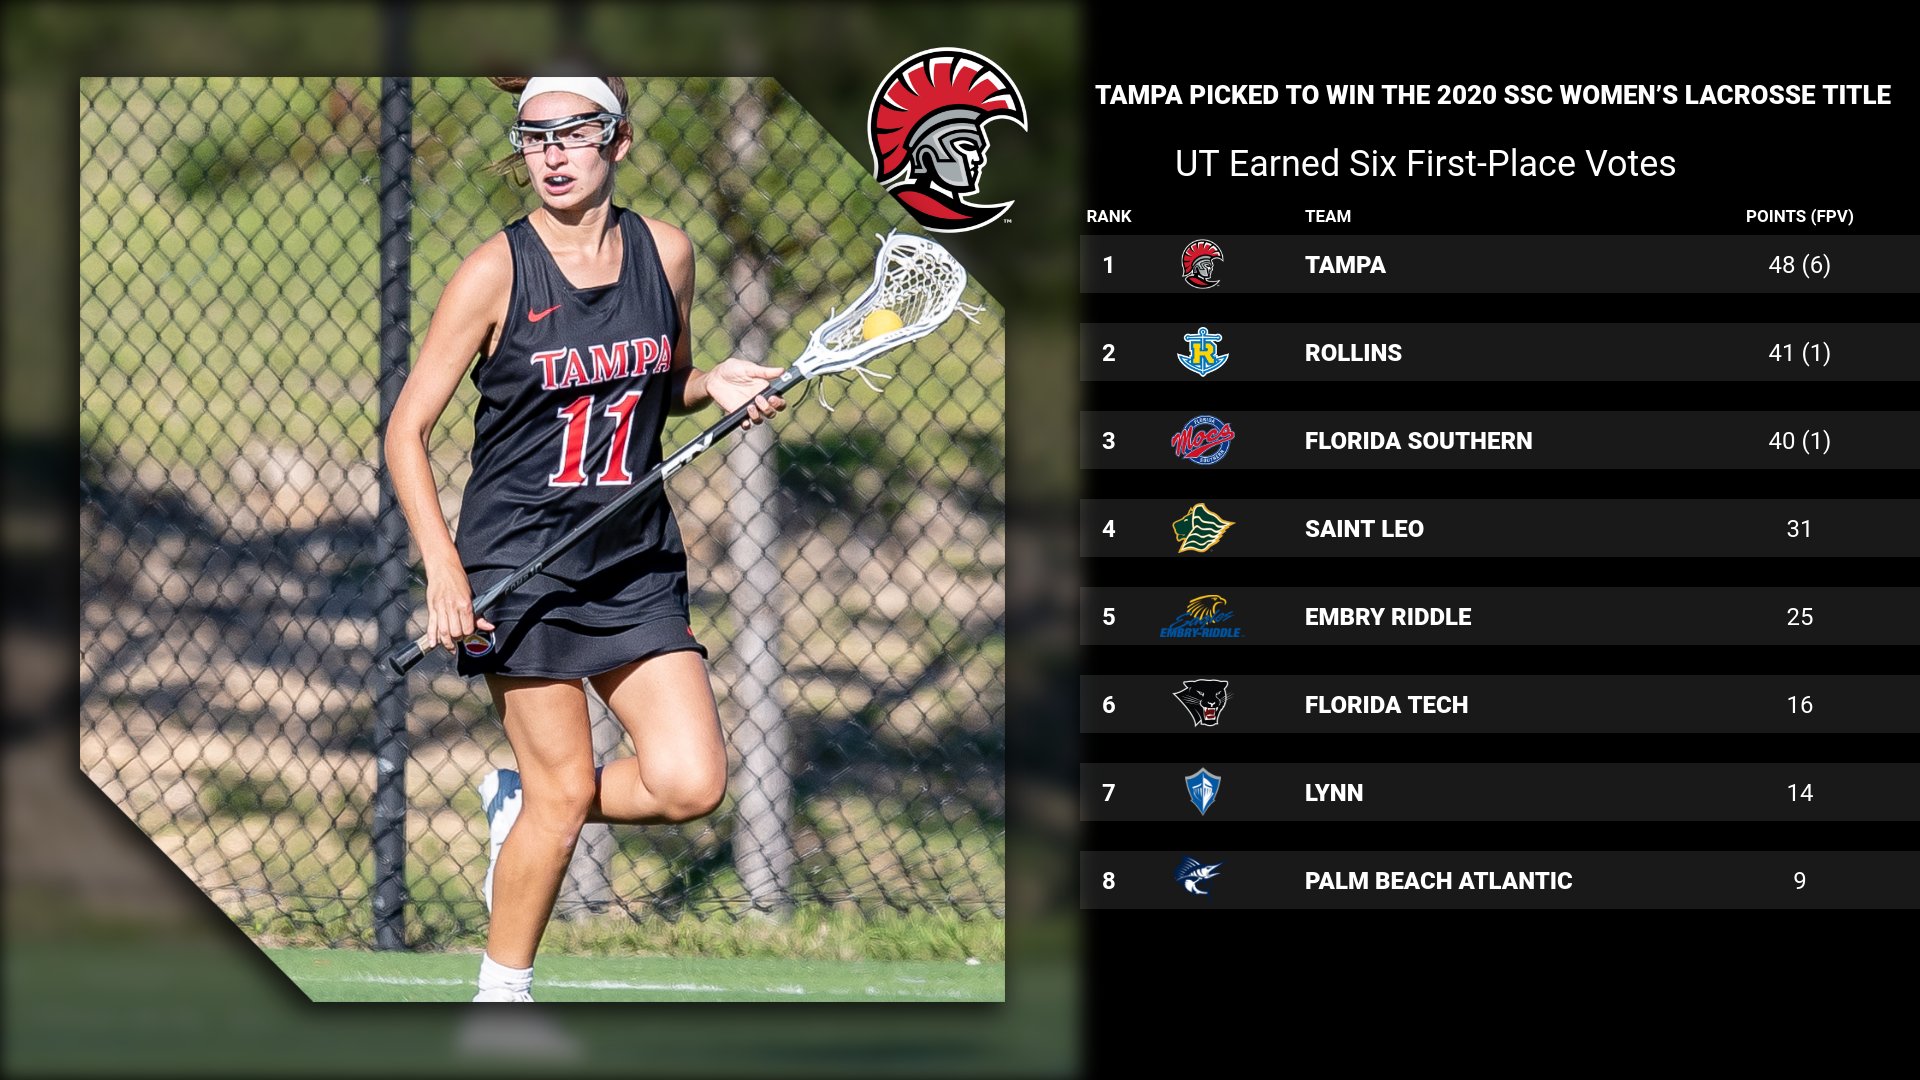 Tampa Picked to Win the 2020 SSC Women's Lacrosse Title